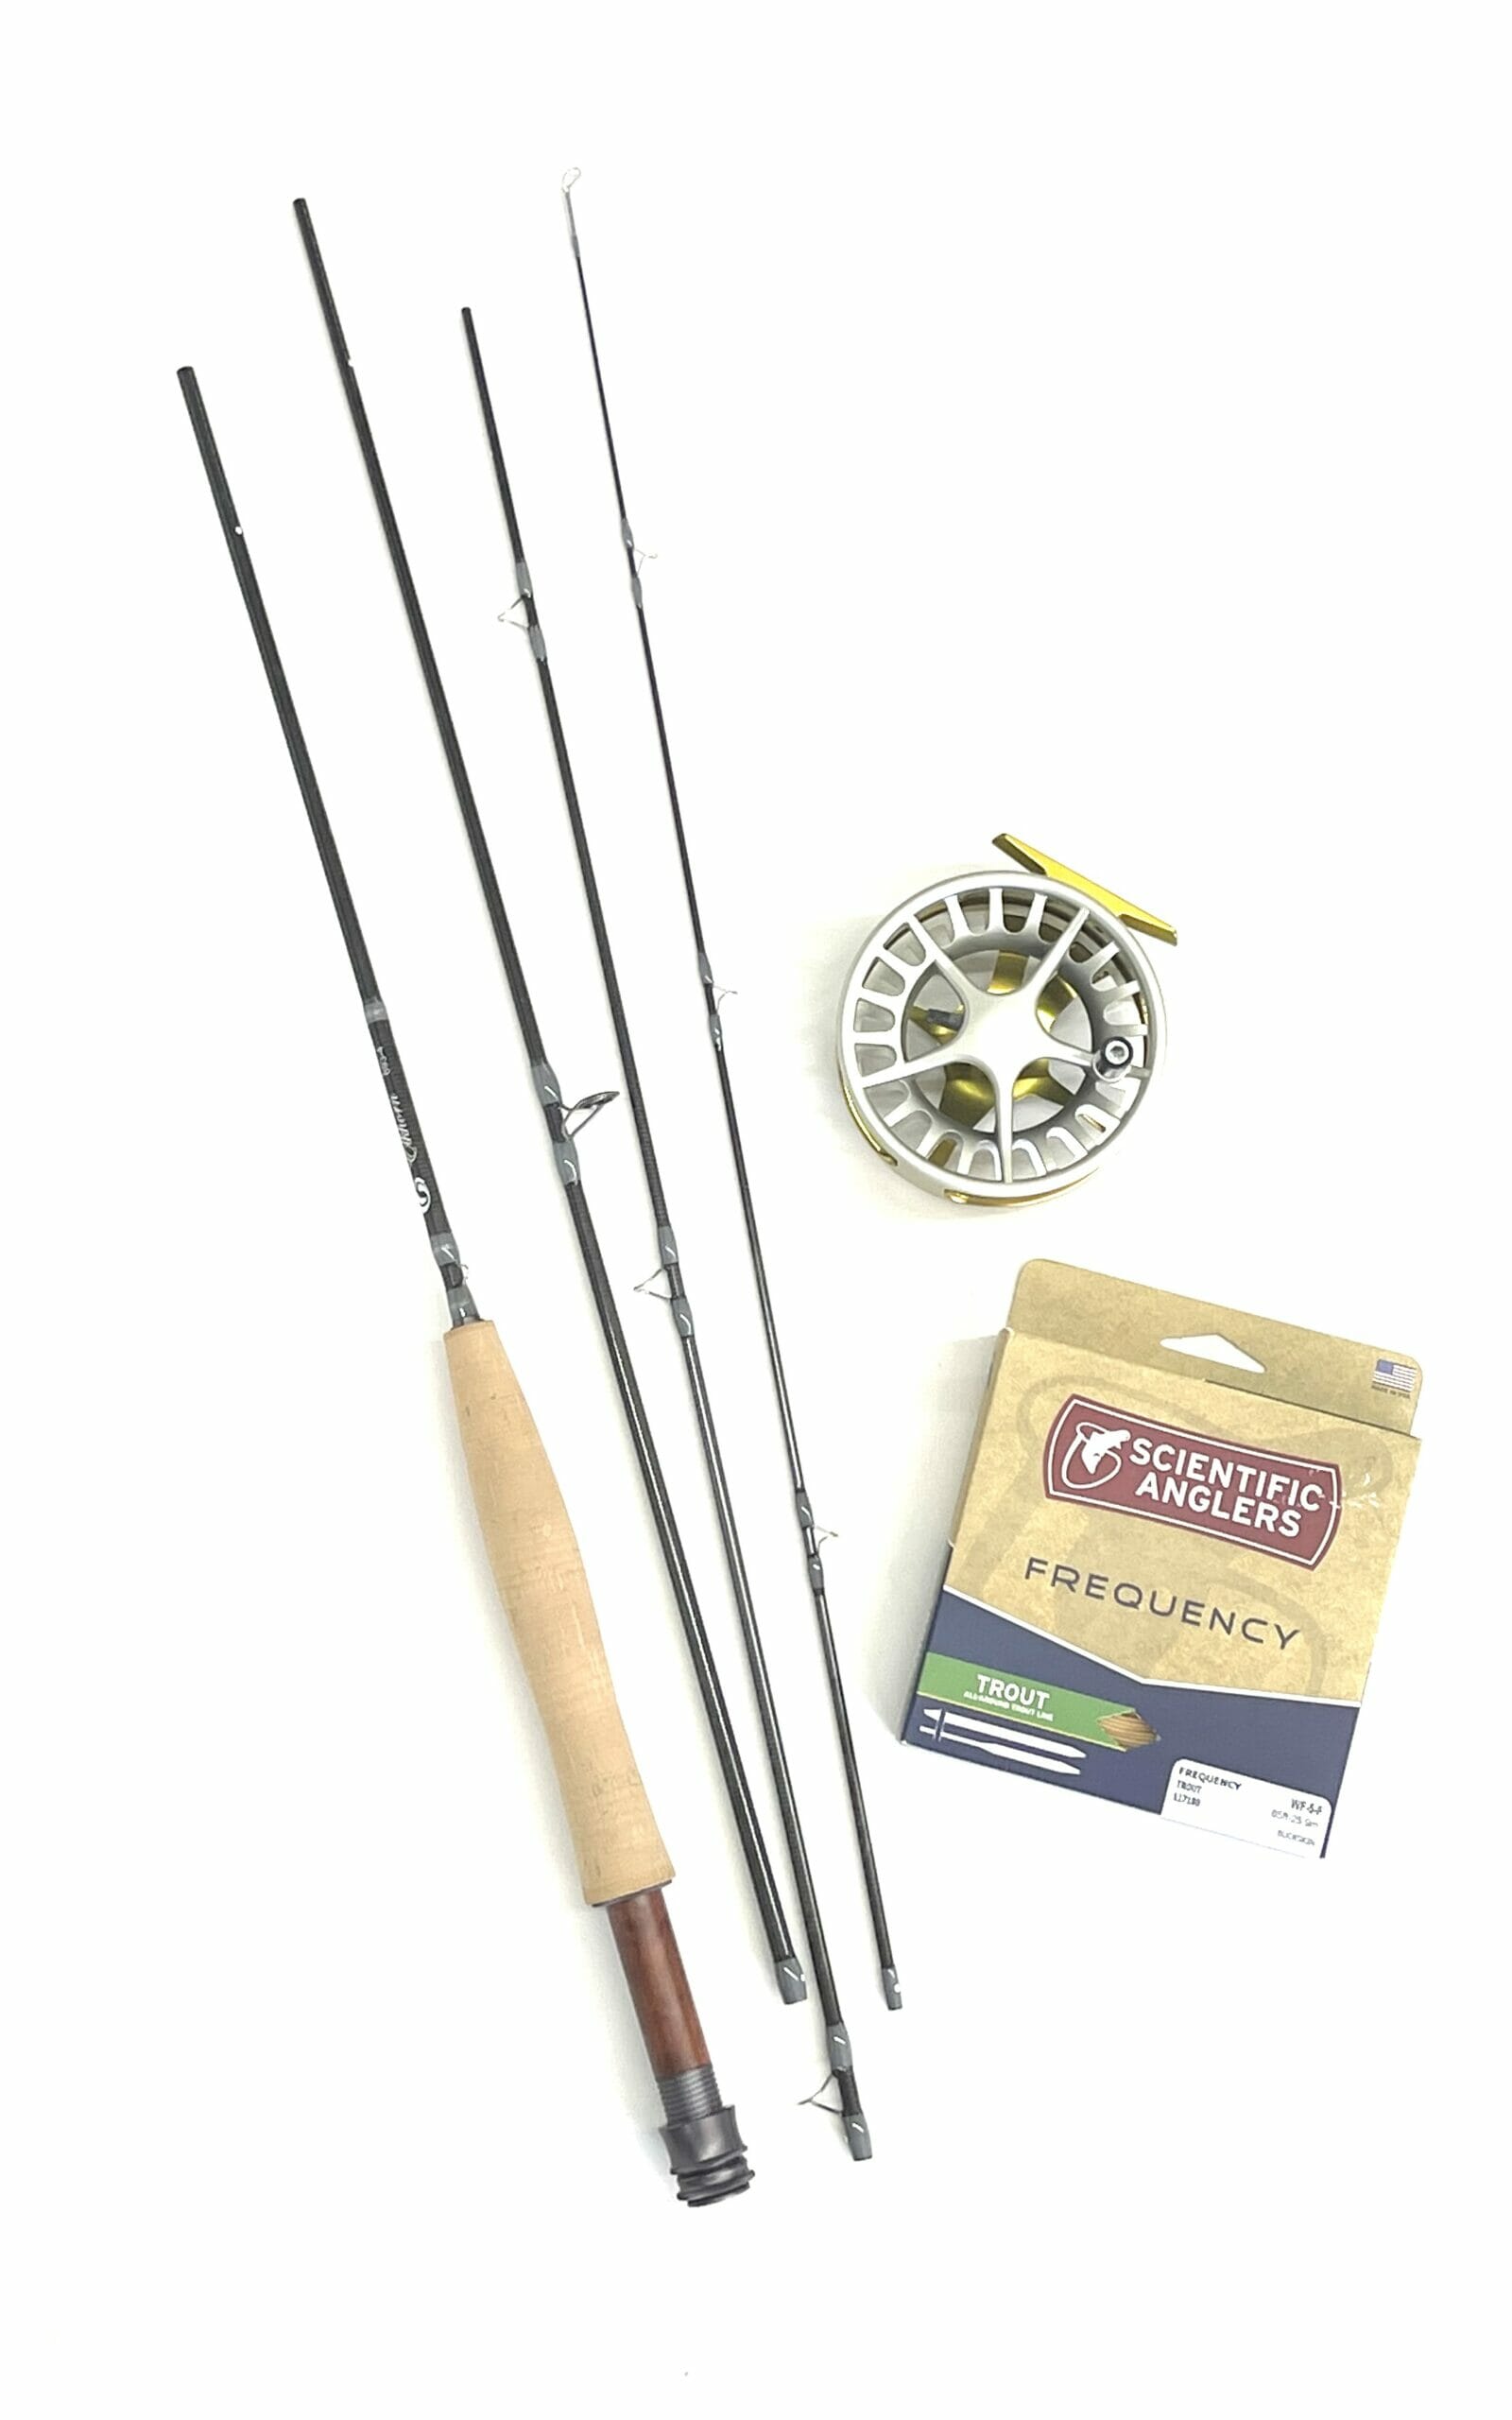 Home Page - Elkhorn Fly Rod & Reel